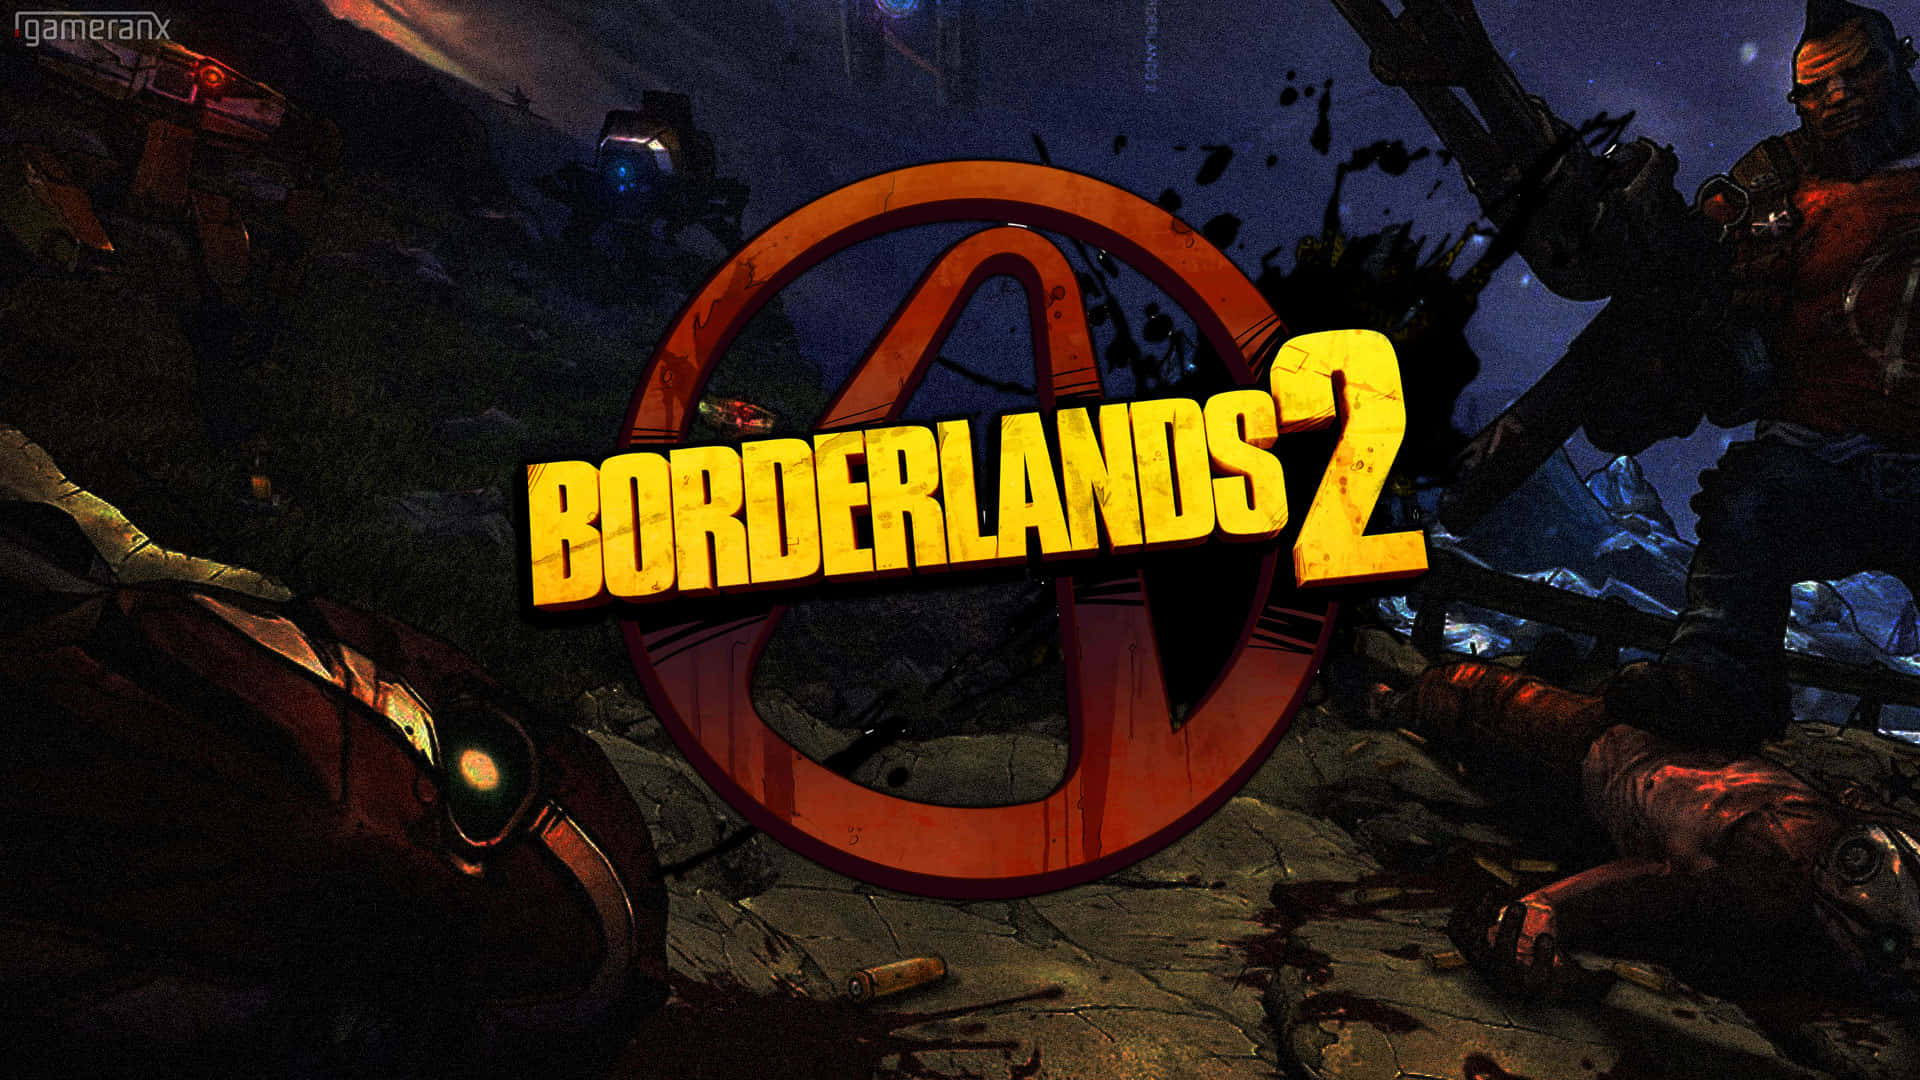 Fight your way through Borderlands 3 in stunning 1080p